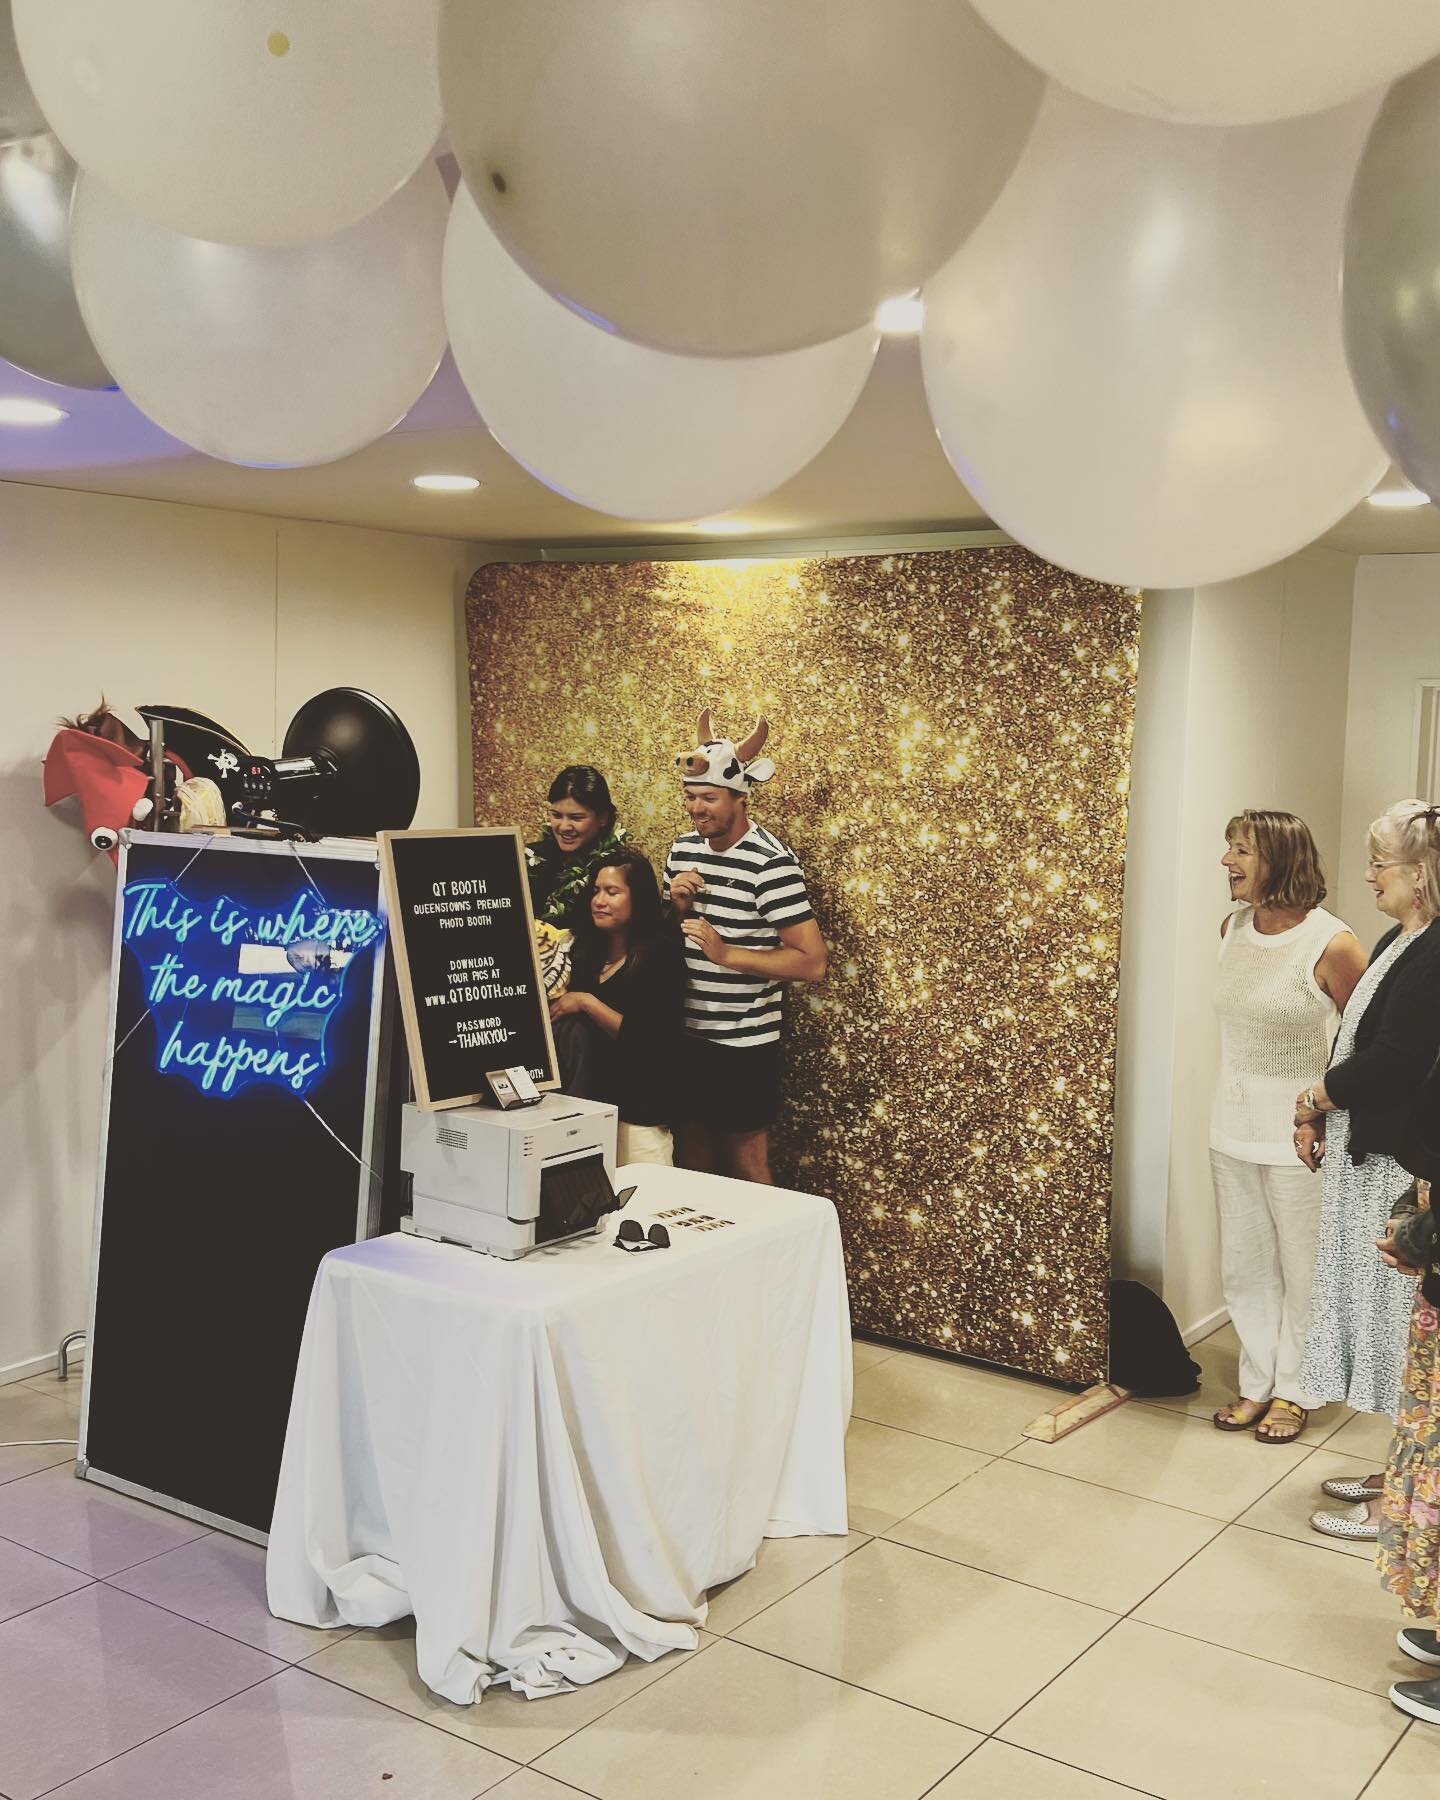 We had so much fun honoring the volunteers of City Impact Church last night. Such a lovely and special crew of Queenstown locals. 

Thanks again to Kelly &amp; Corey for bringing the QT Booth along for the party. Volunteers make the world go &lsquo;r